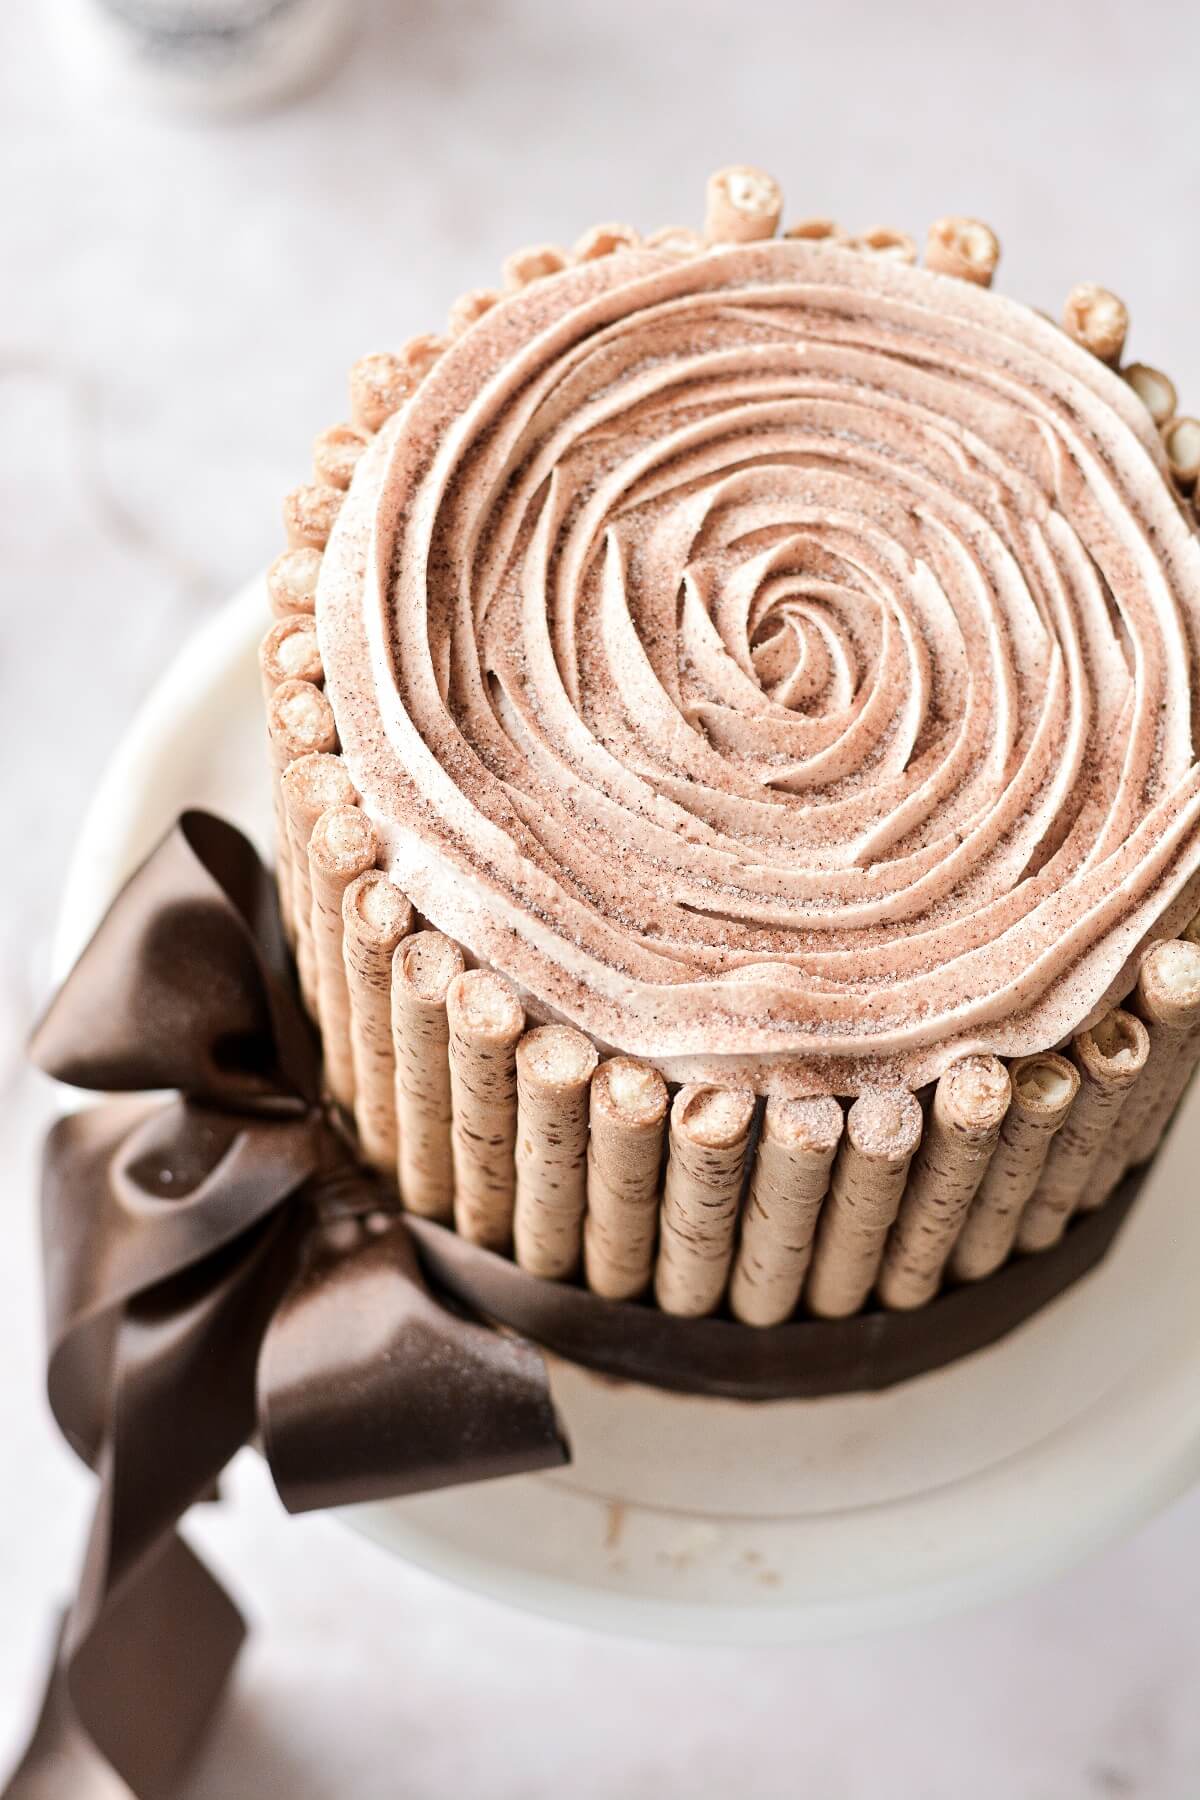 A snickerdoodle cake with piped buttercream, surrounded by Pirouettes cookies and tied with a brown satin ribbon.